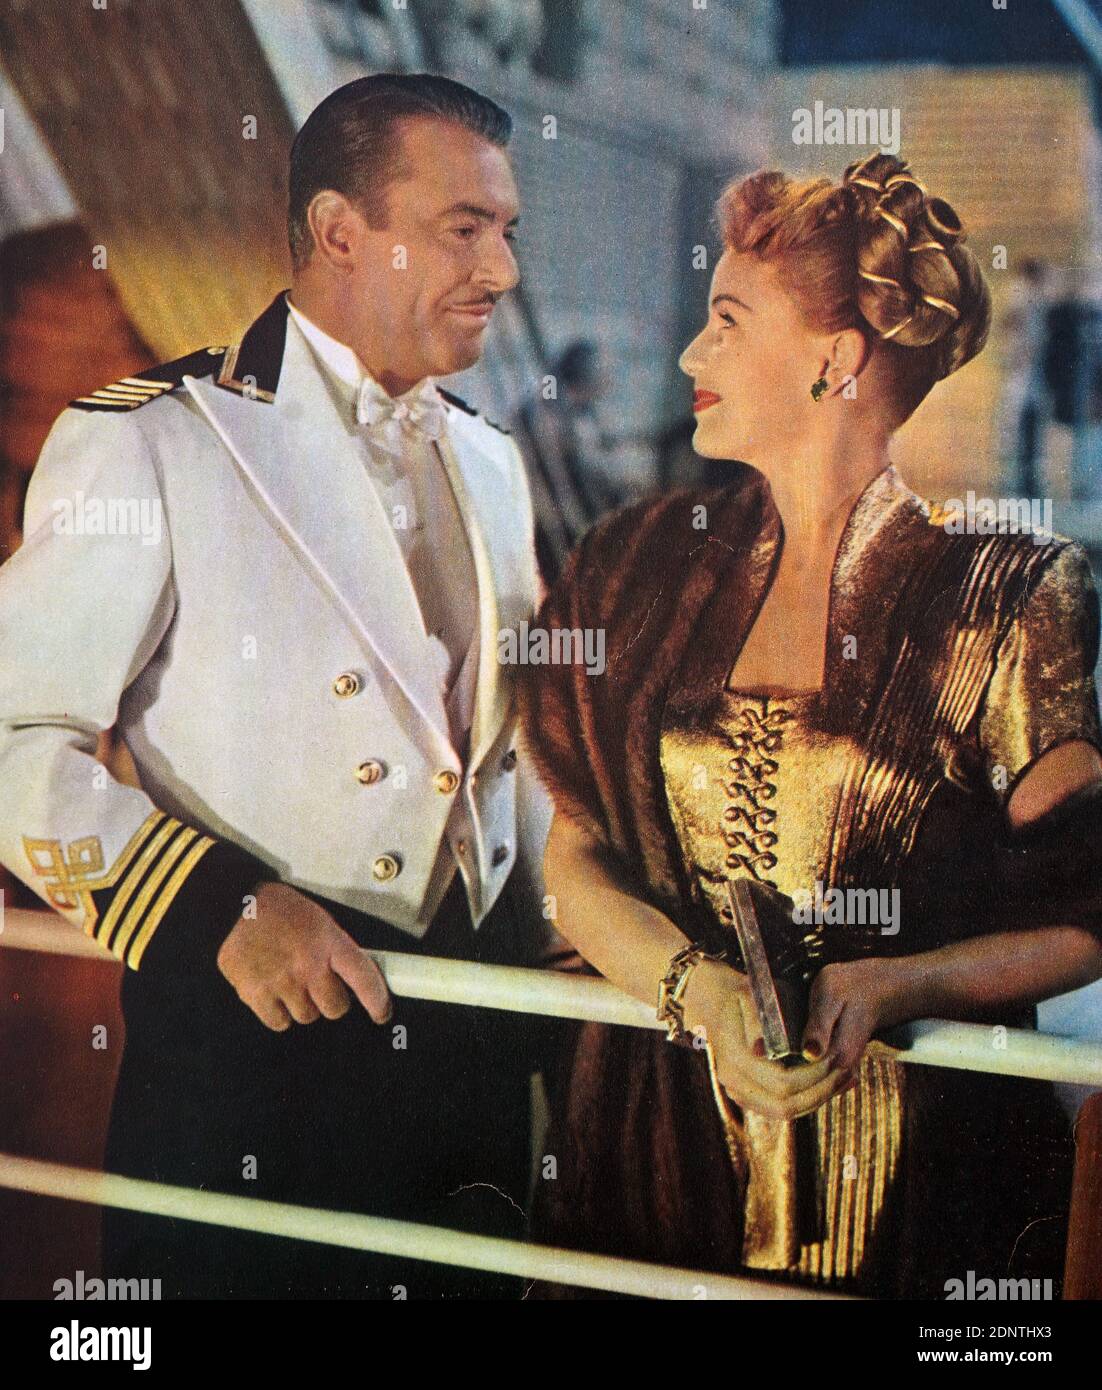 Film still from 'Luxury Liner' starring Jane Powell, George Brent, Xavier Cugat, and Lauritz Melchior. Stock Photo